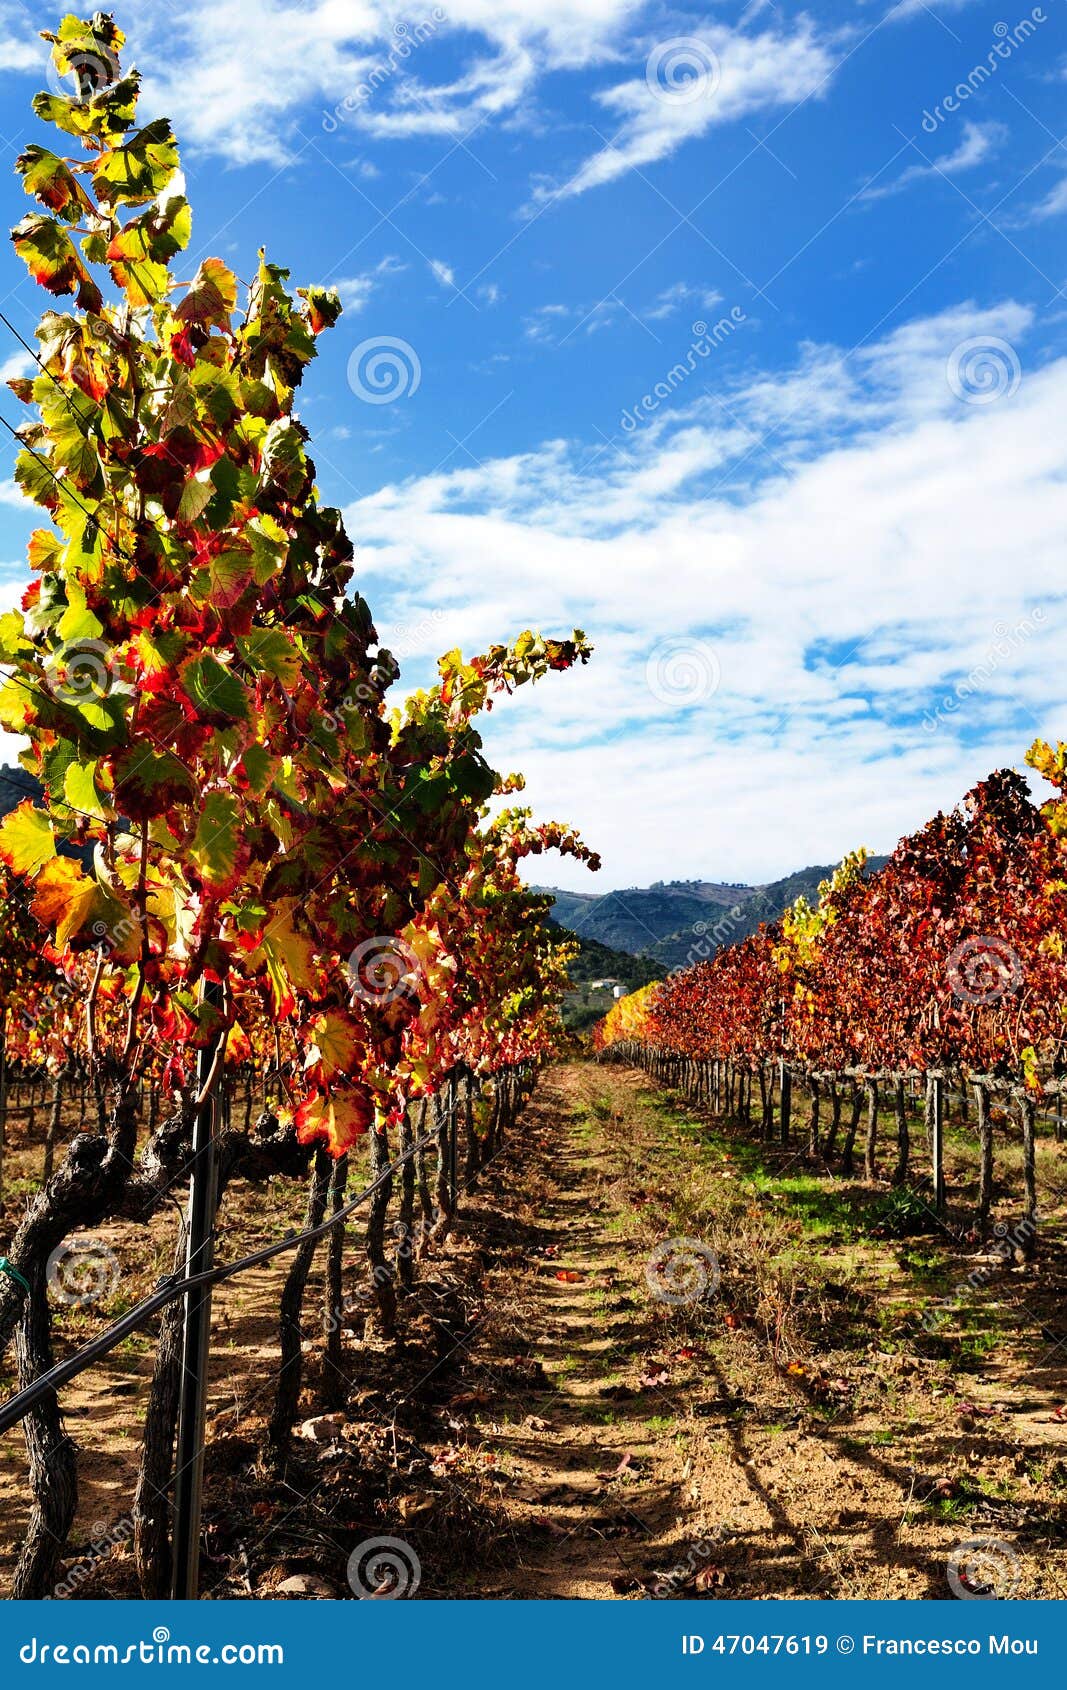 The vine with the colors of autumn. Details of vineyards, rows of vines young and old with the colors of autumn.